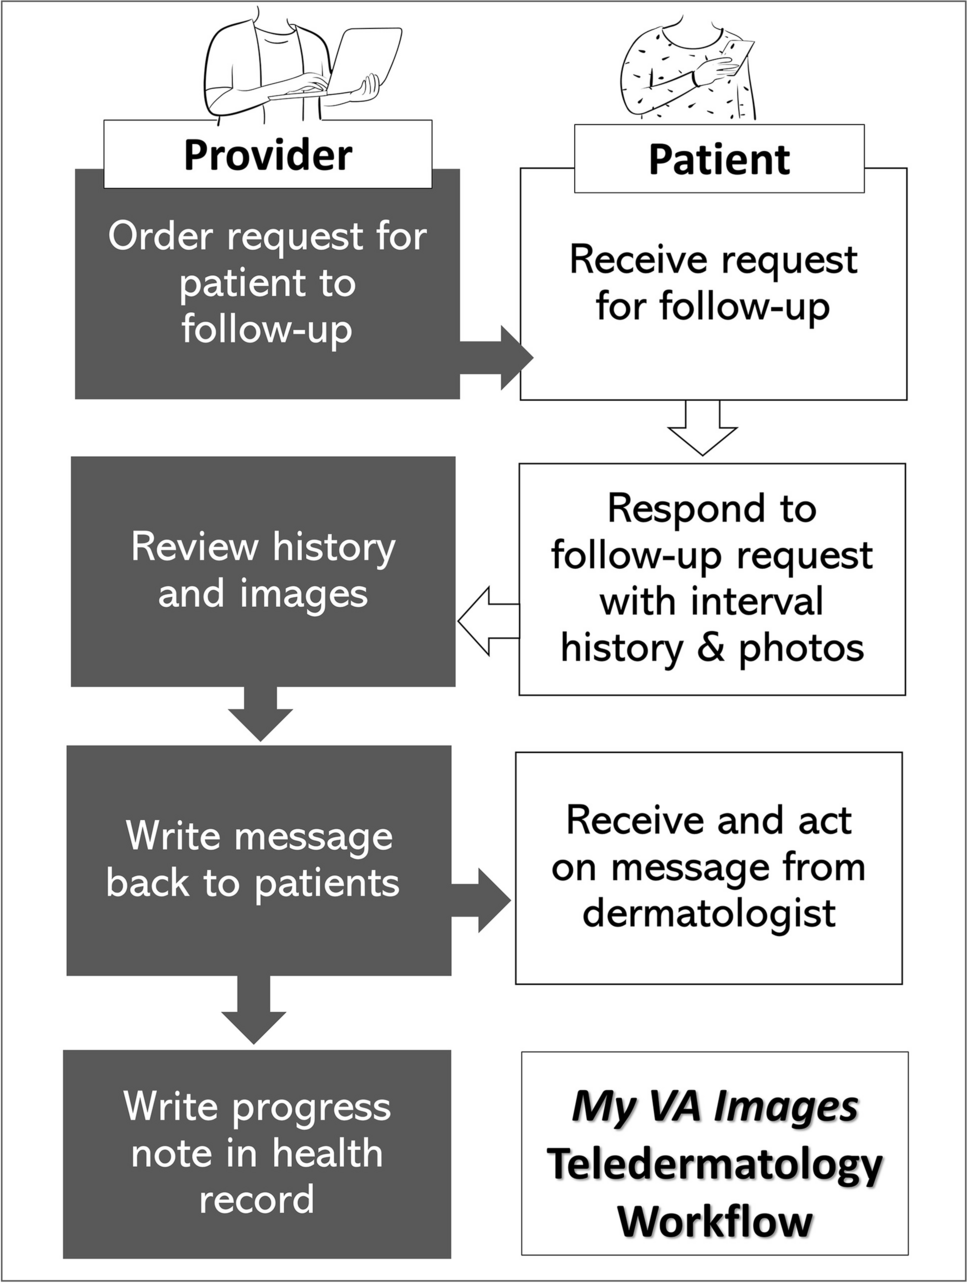 Implementation of Direct-to-Patient Mobile Teledermatology in VA